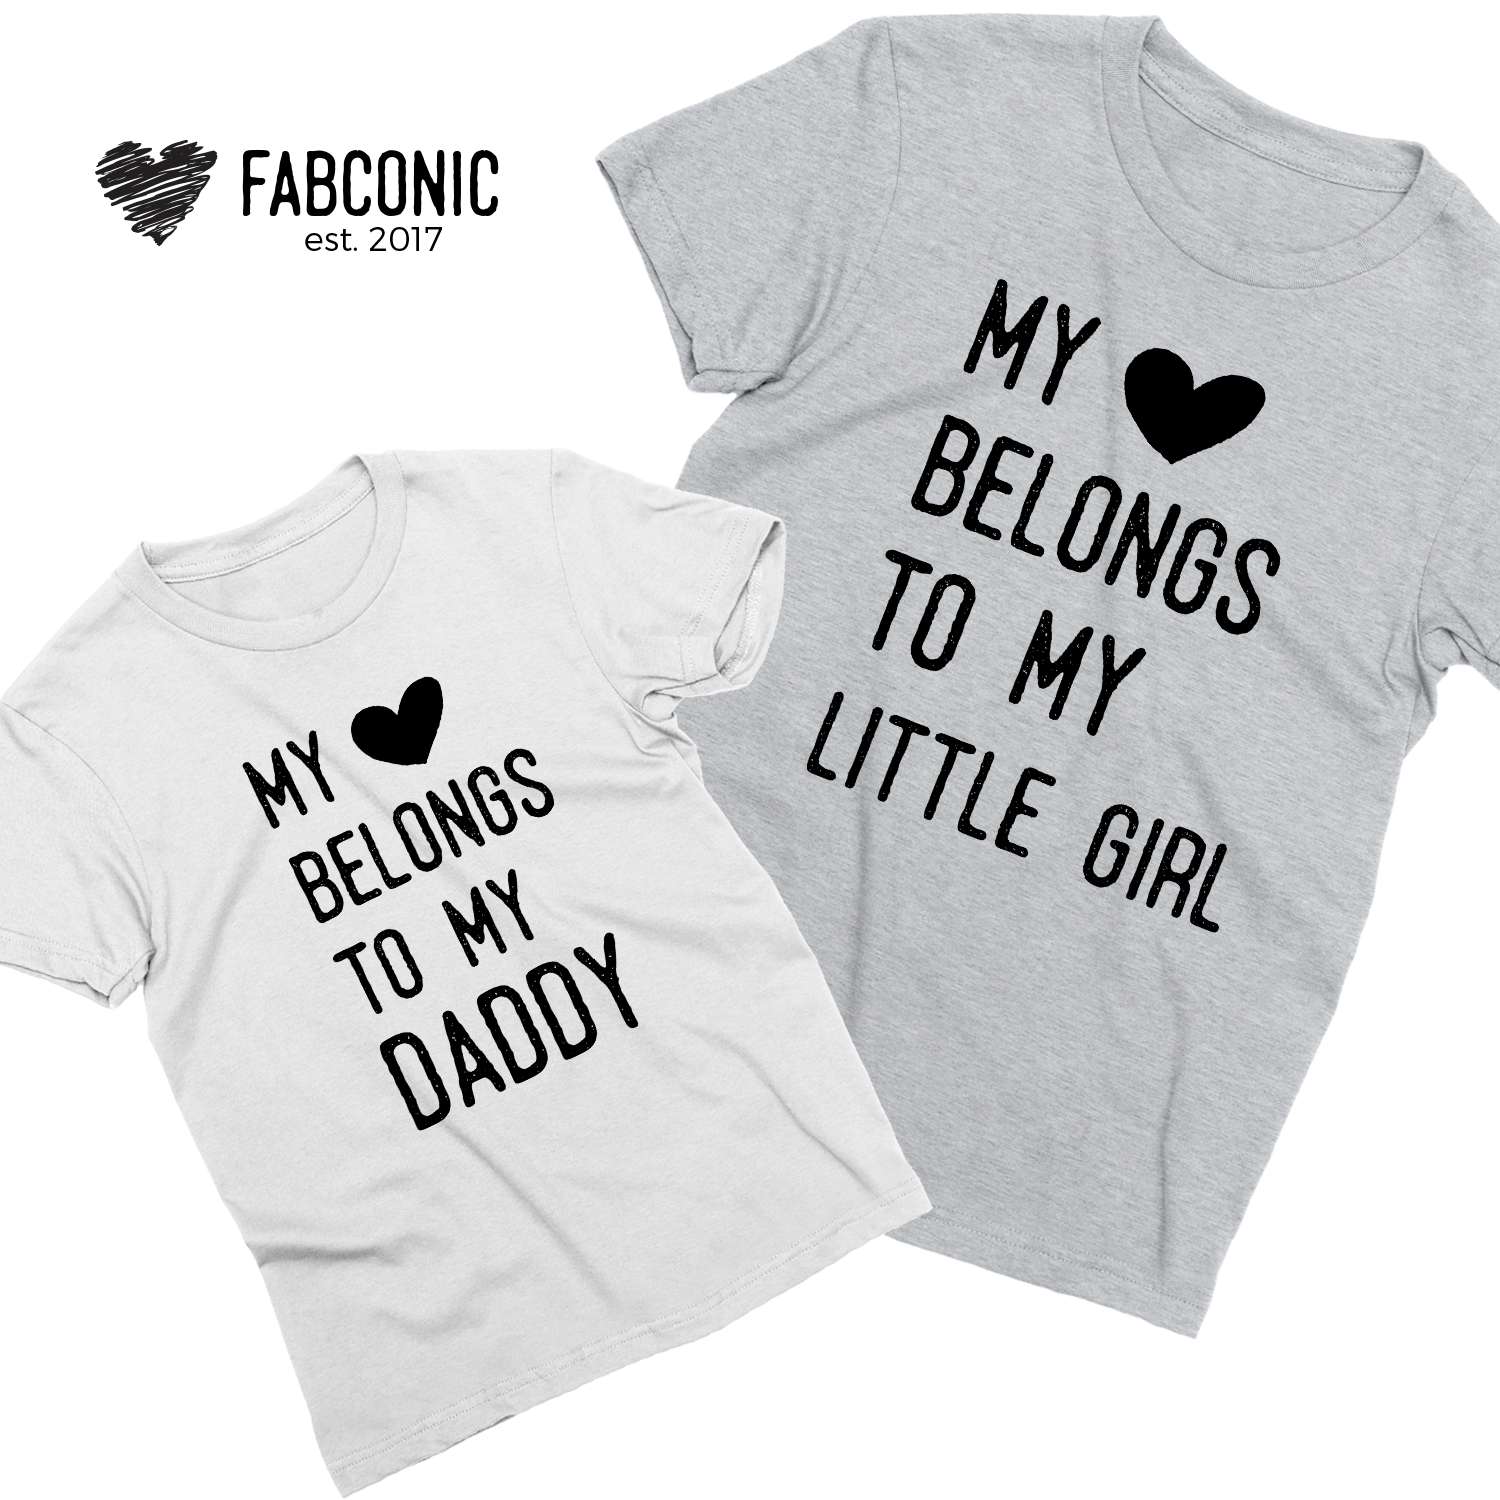 Love U Heart Father and Daughter Matching T-Shirts Set 